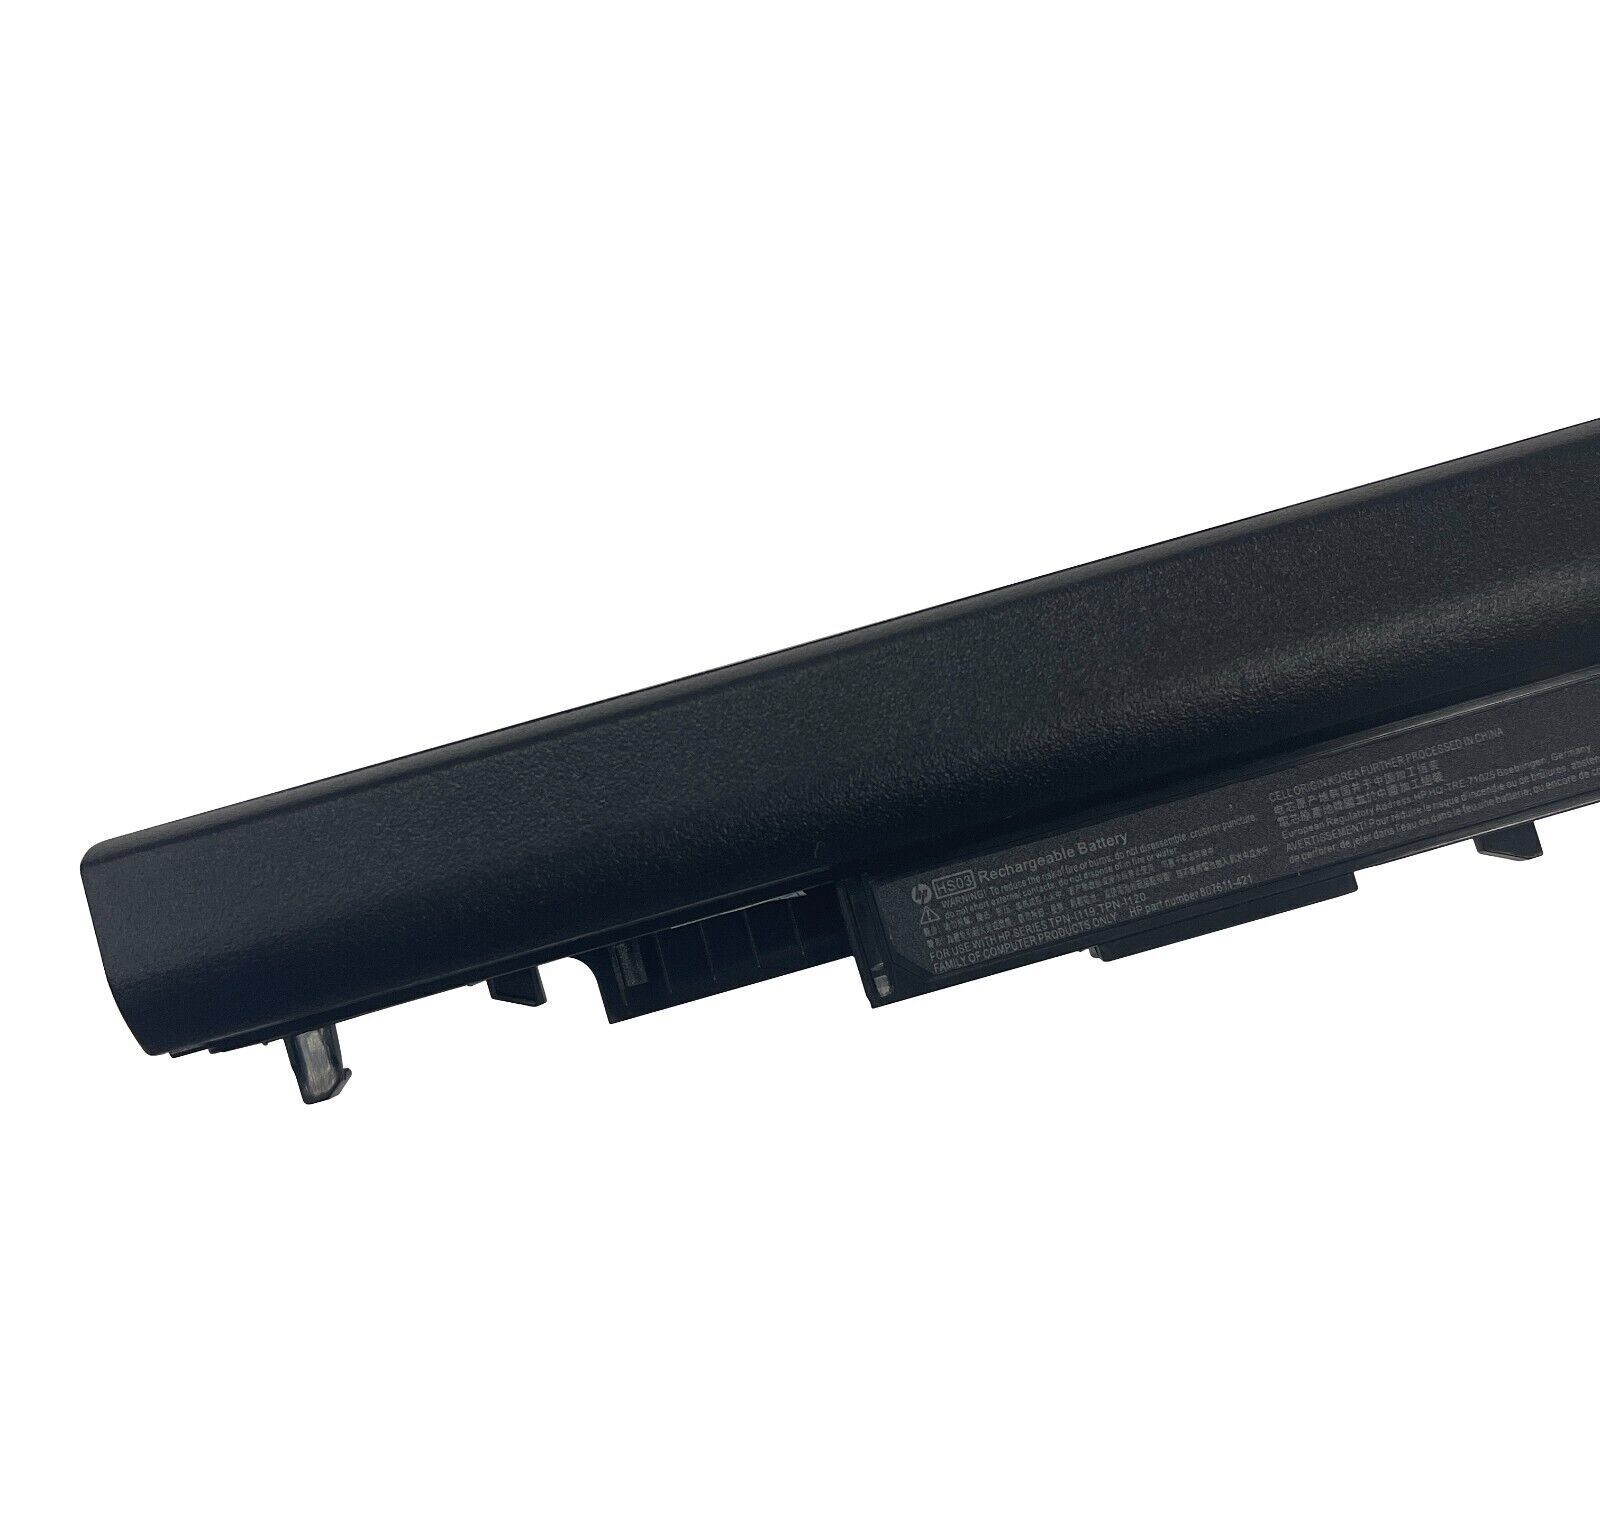 Genuine OEM 31Wh HS03 Battery For HP 807956-001 807957-001 807612-421 807611-421